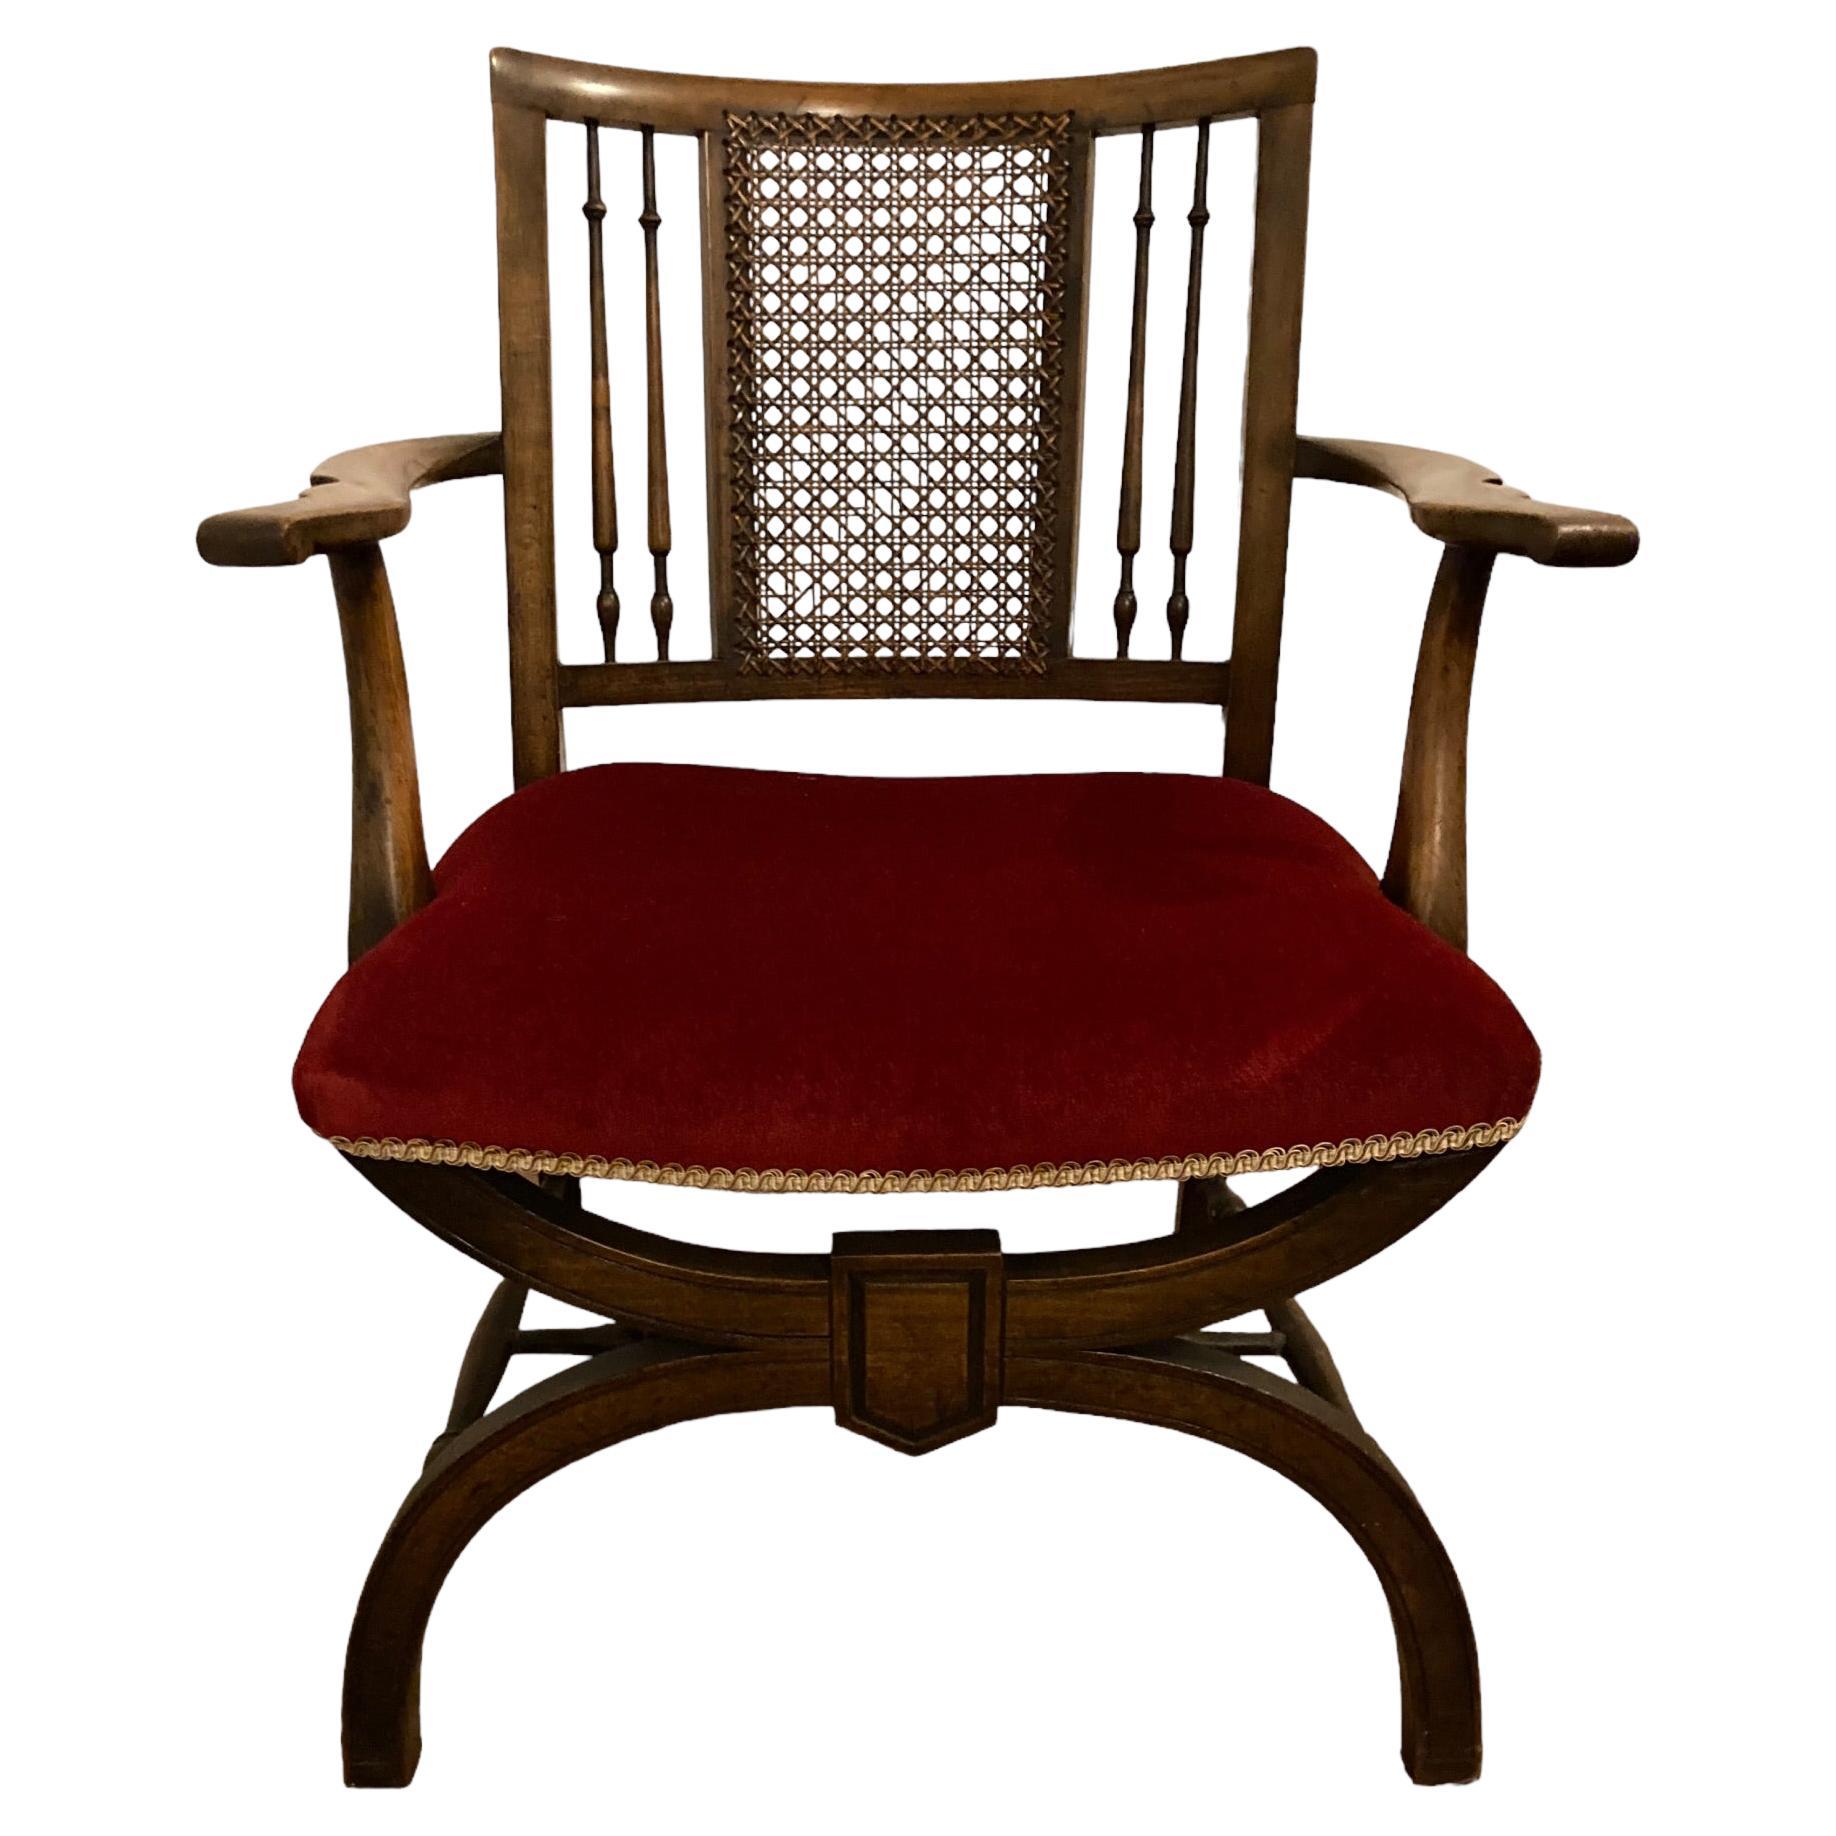 A rare Antique Beech Wood X Framed Cane back Arm chair For Sale